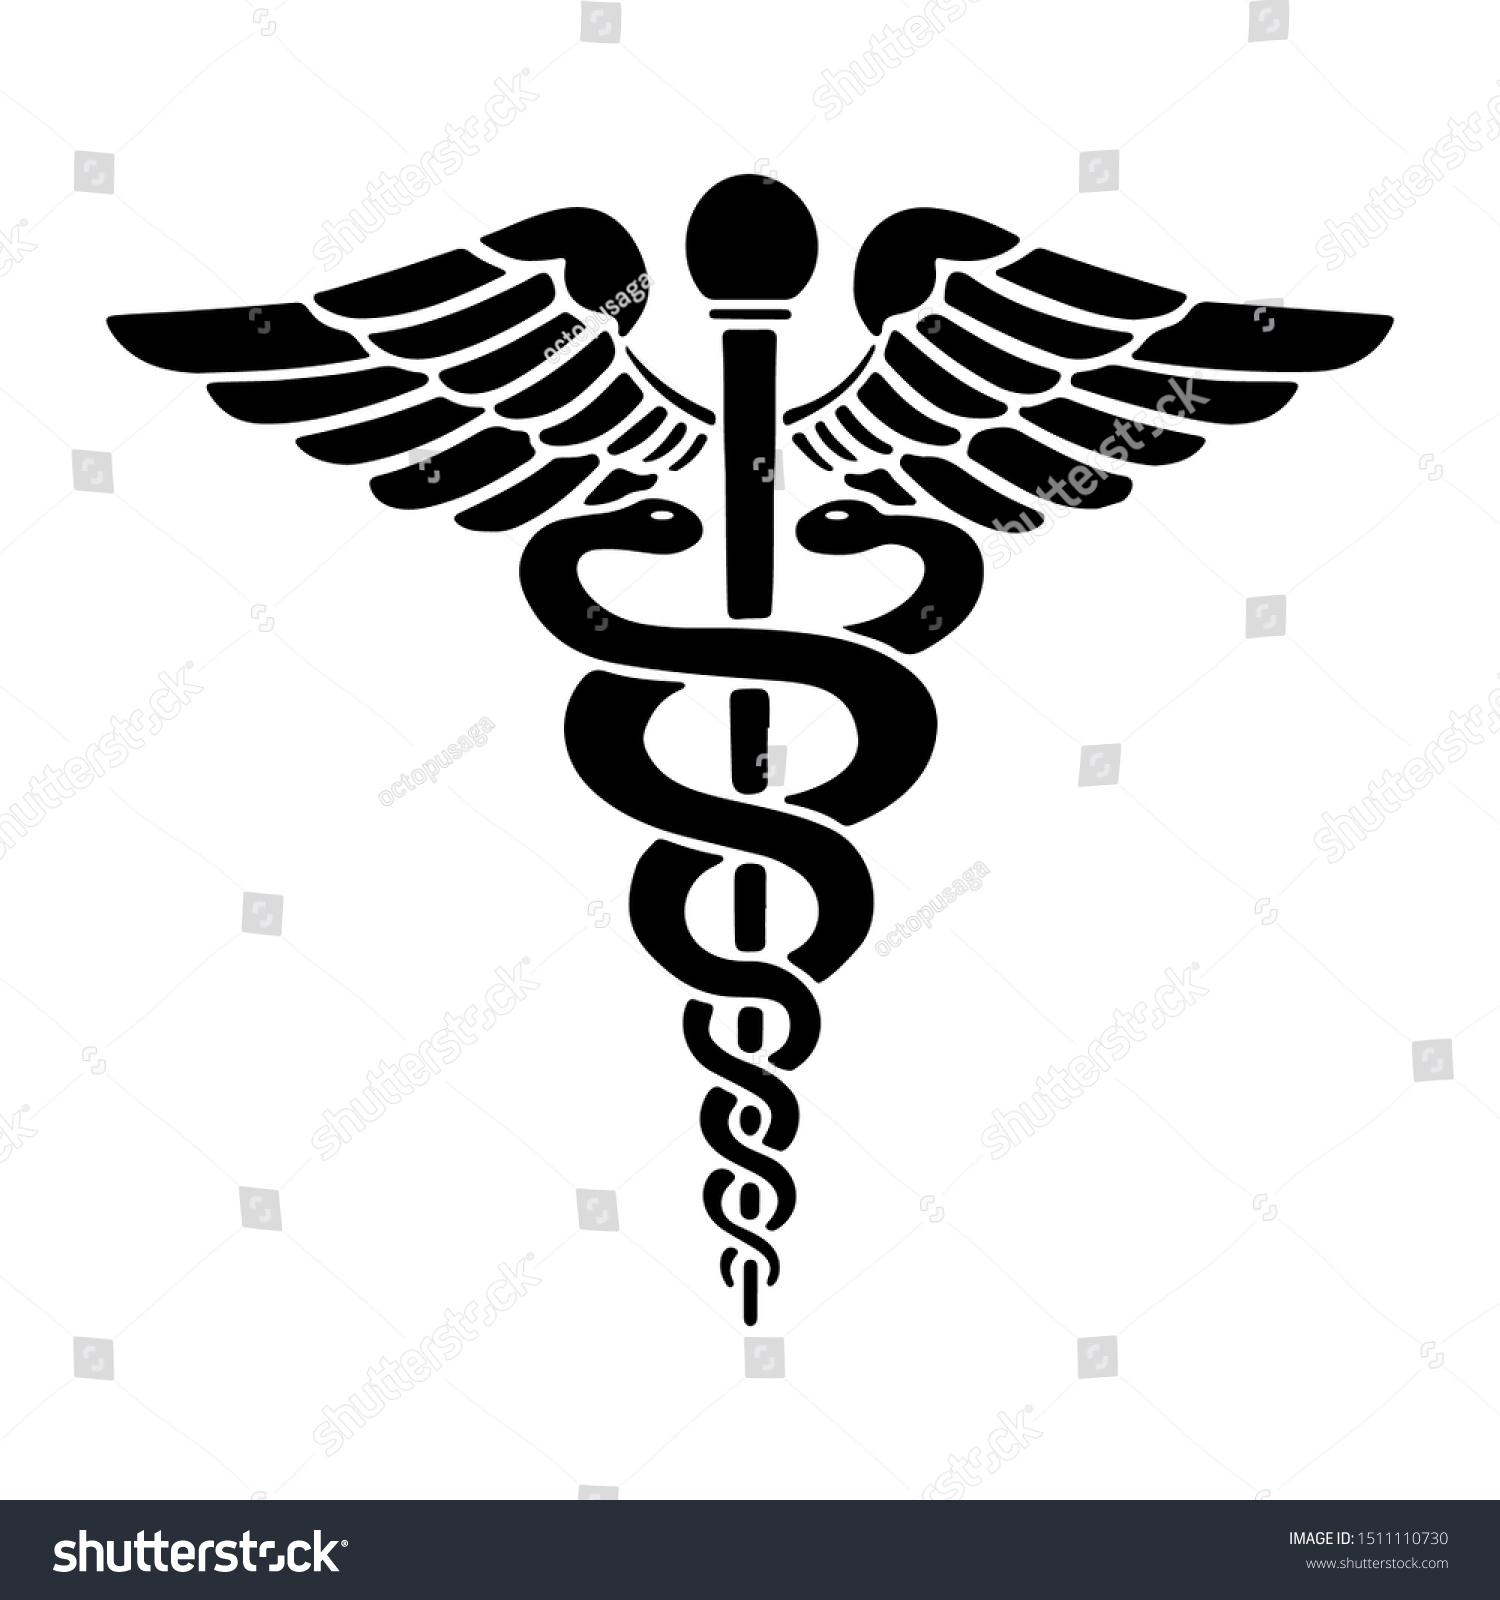 Medical Snake Caduceus Logo Sign Template Vector Isolated on White Background #1511110730